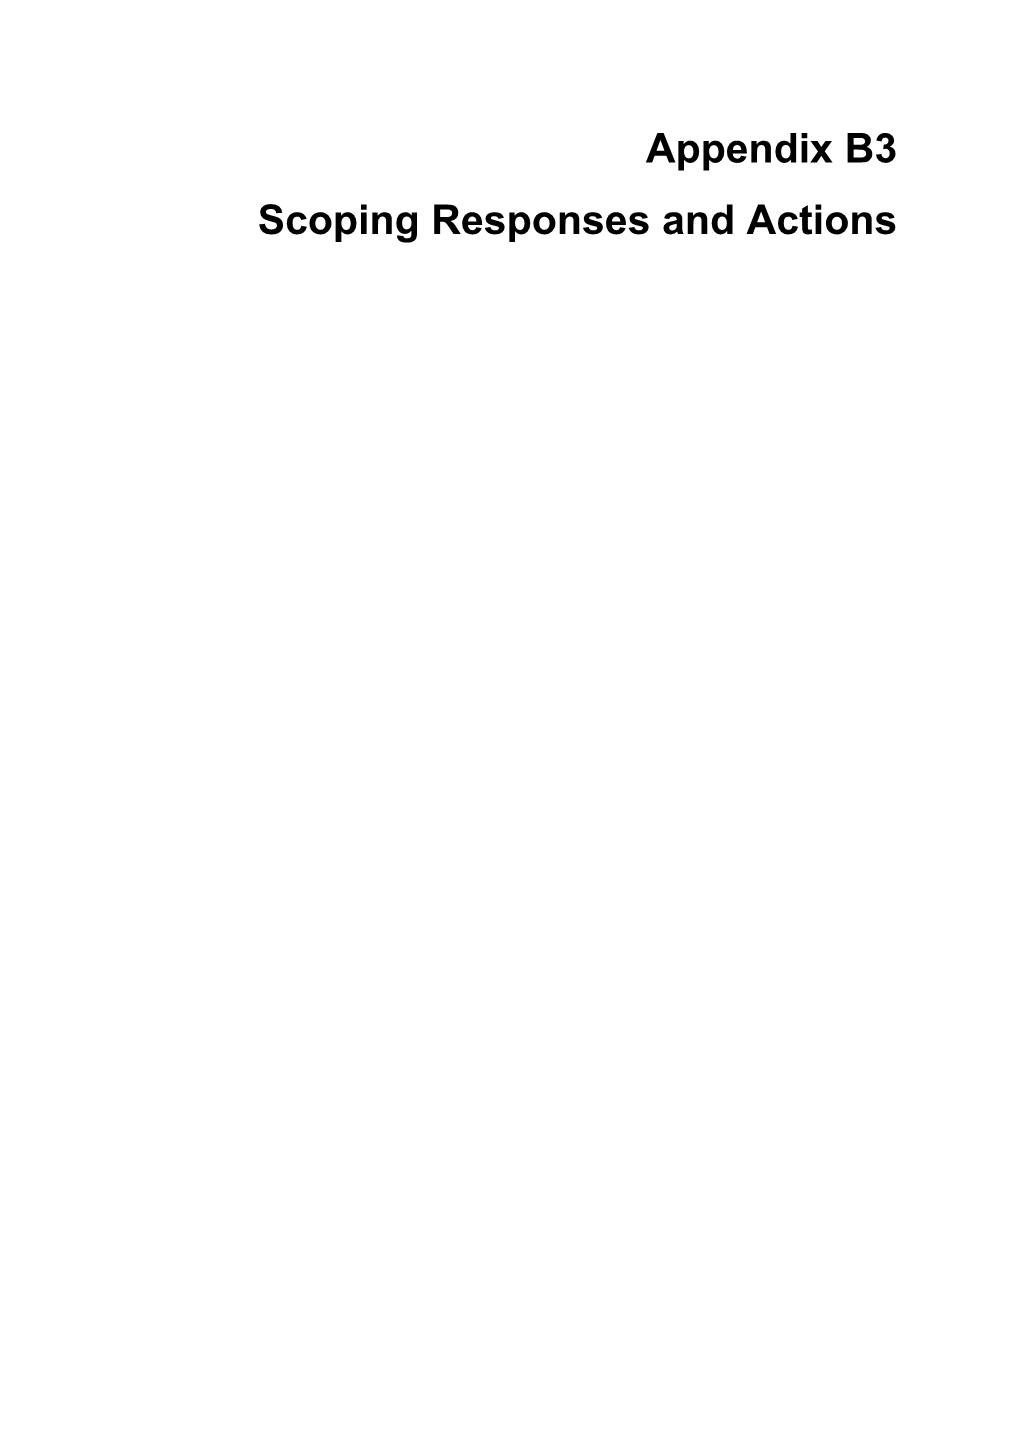 Appendix B3 Scoping Responses and Actions 660961 Appendix B3 Scoping Response and Actions